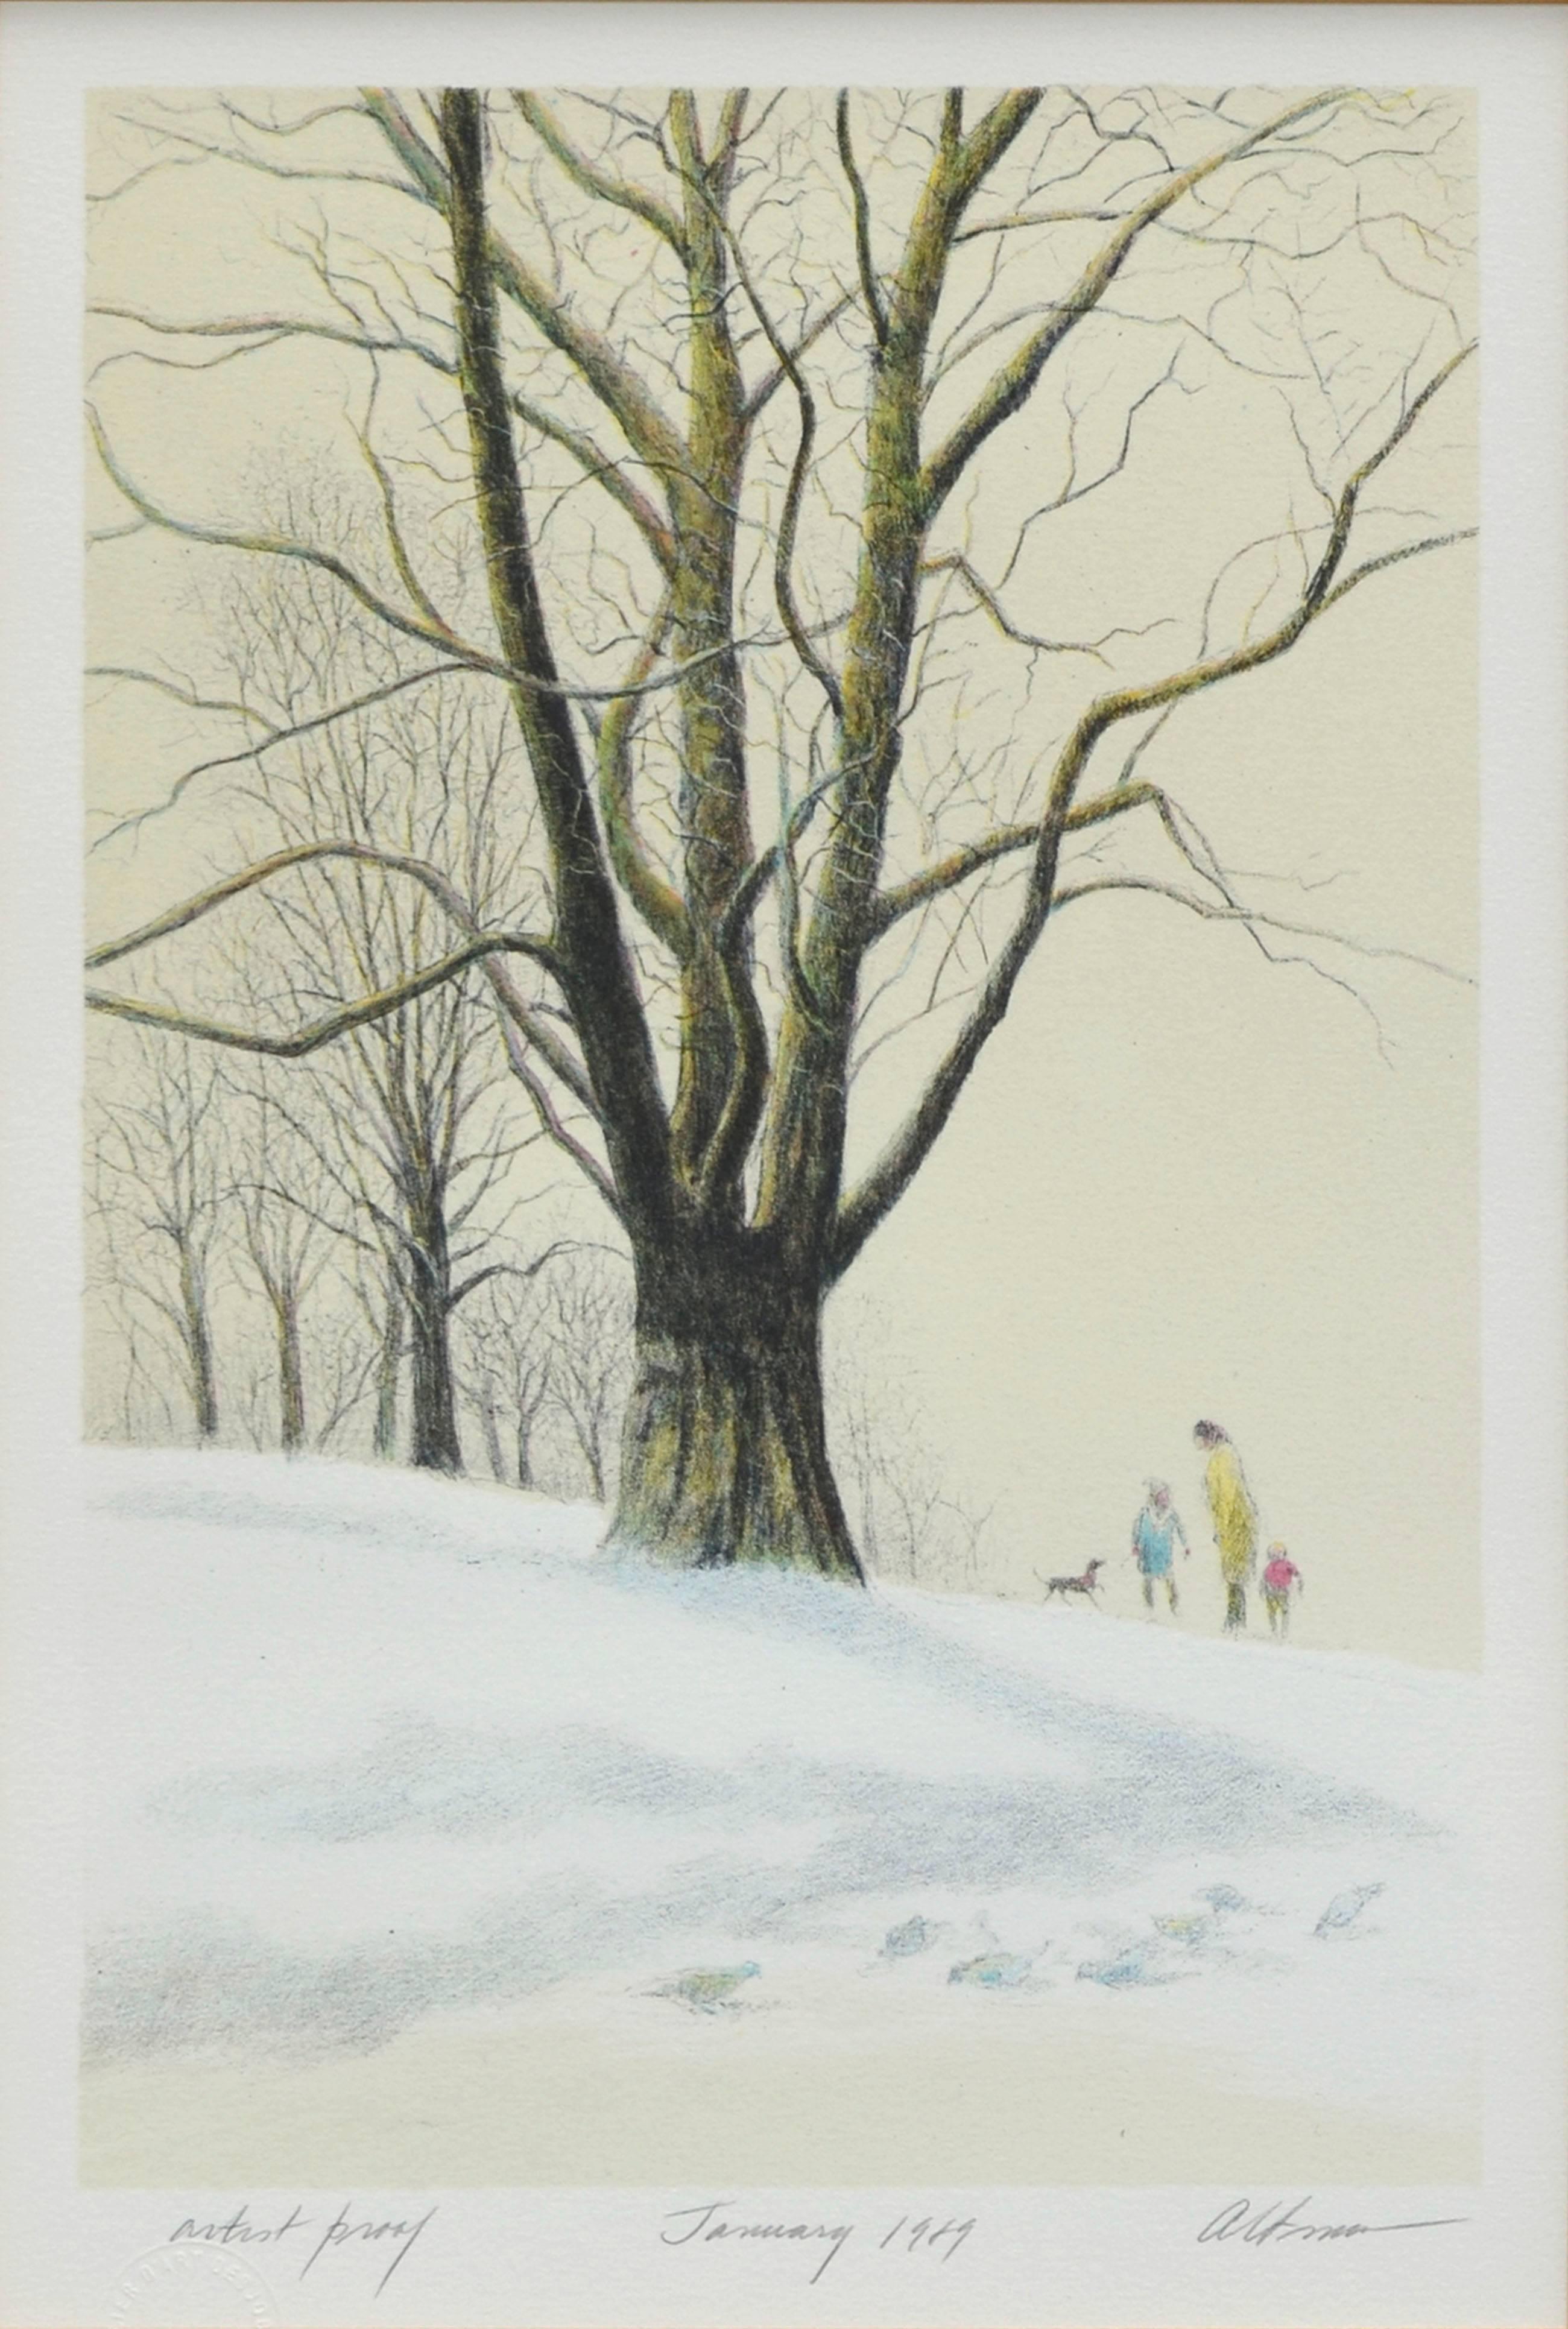 Central Park in the Snow - Print by Harold Altman